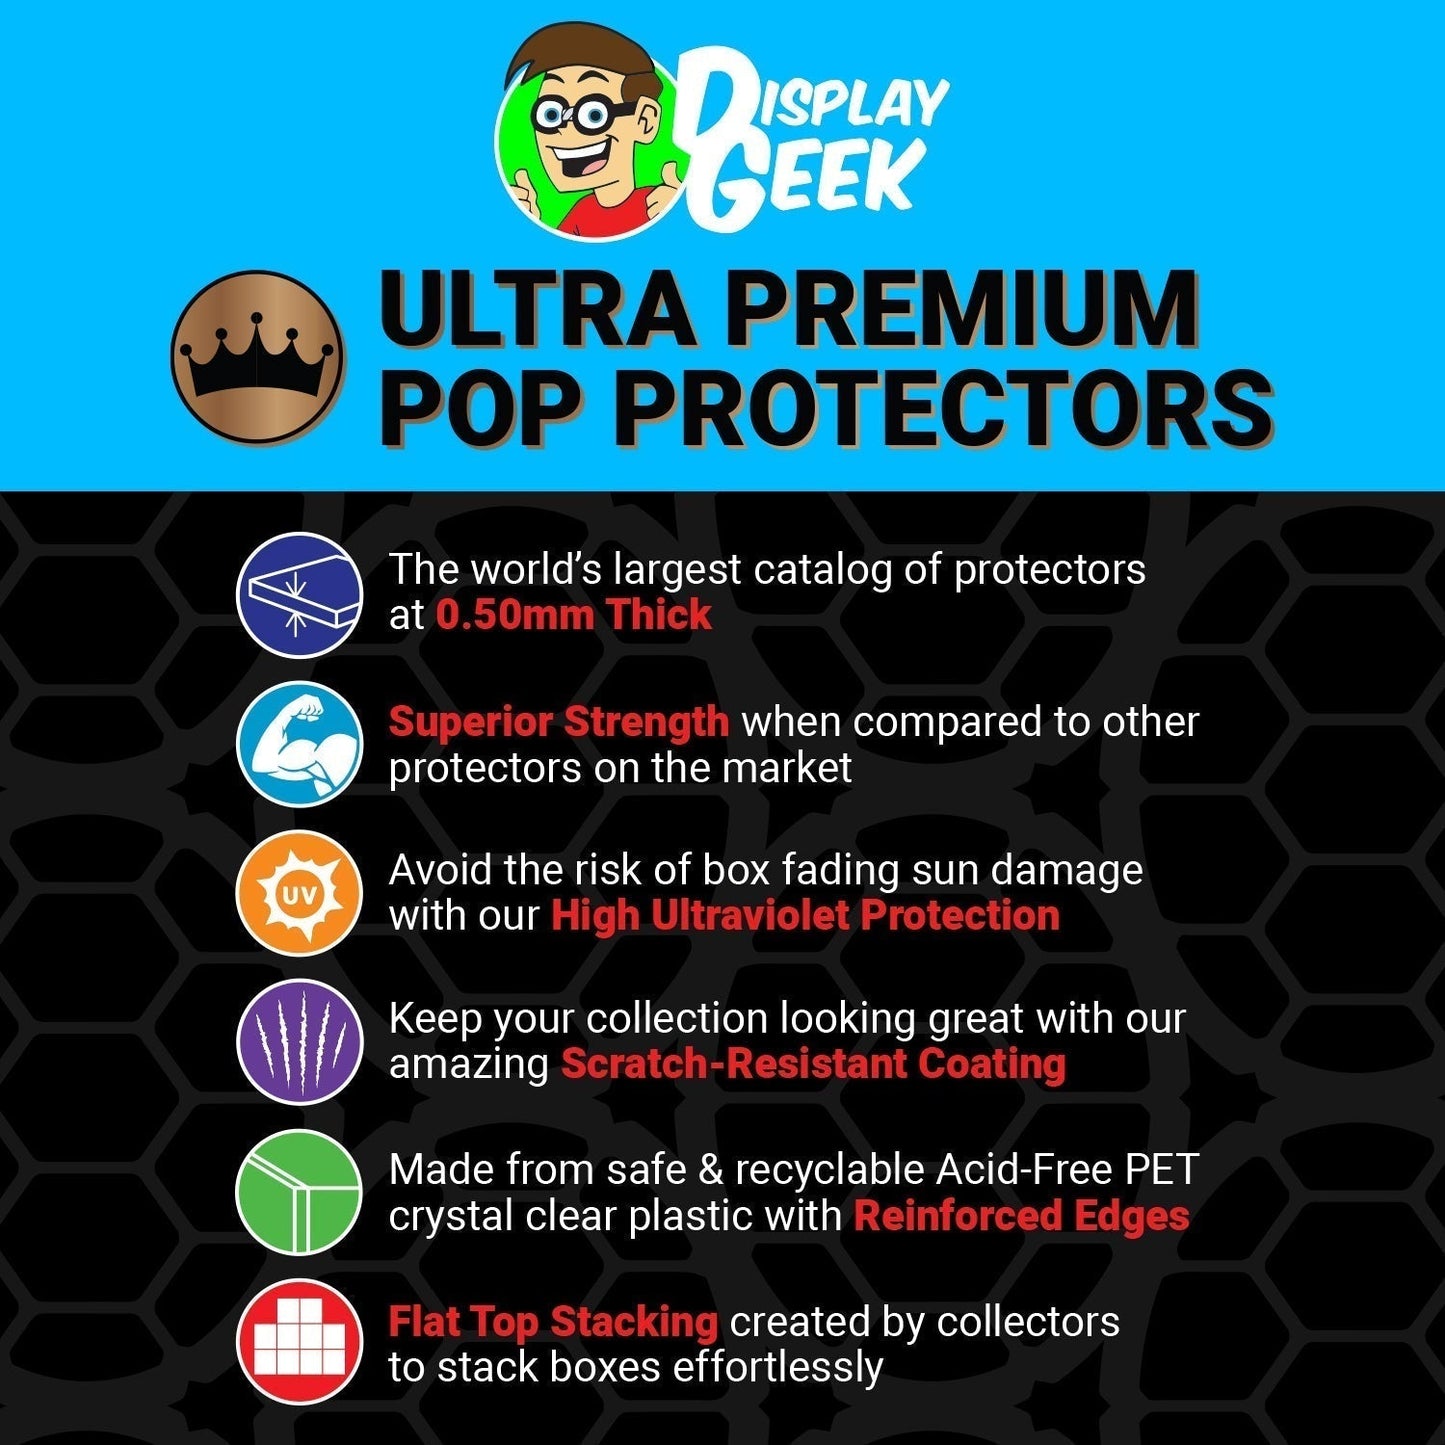 Pop Protector for Maleficent FunkO's Cereal Box - PPG Pop Protector Guide Search Created by Display Geek